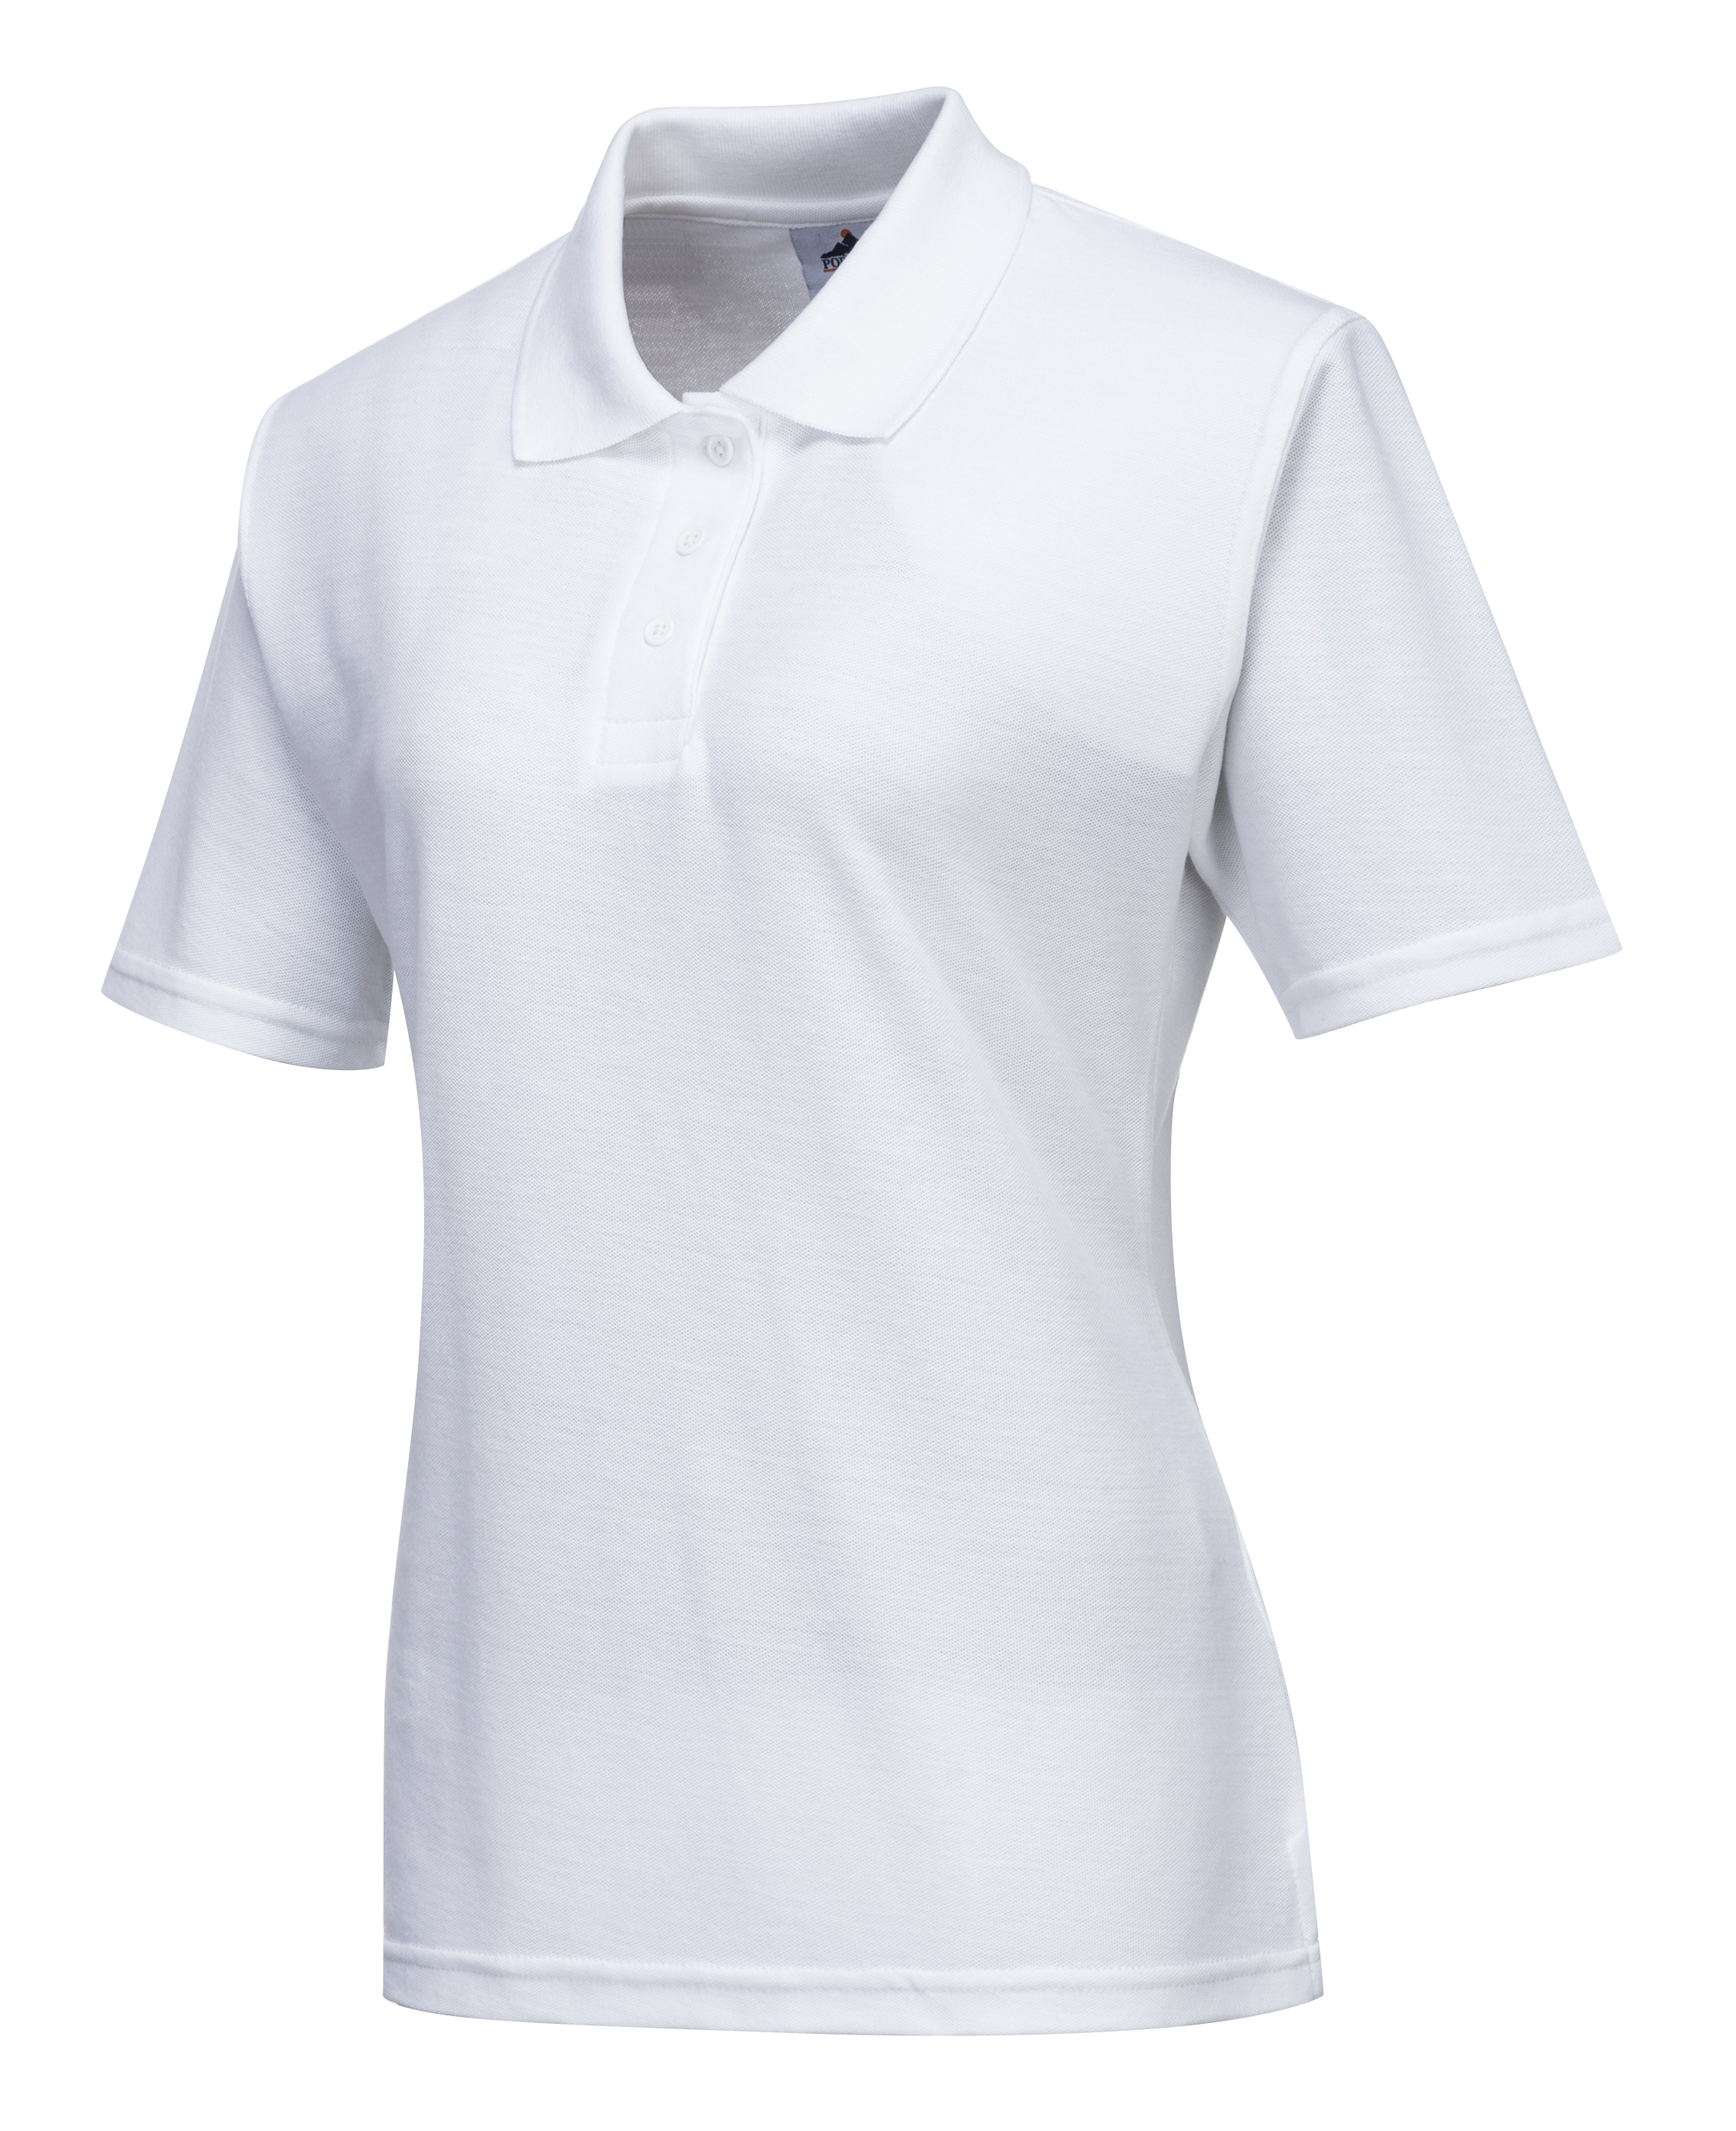 ax-httpss3.eu-west-2.amazonaws.comwebsystemstmp_for_downloadportwest-naples-ladies-polo-shirt-white.jpeg